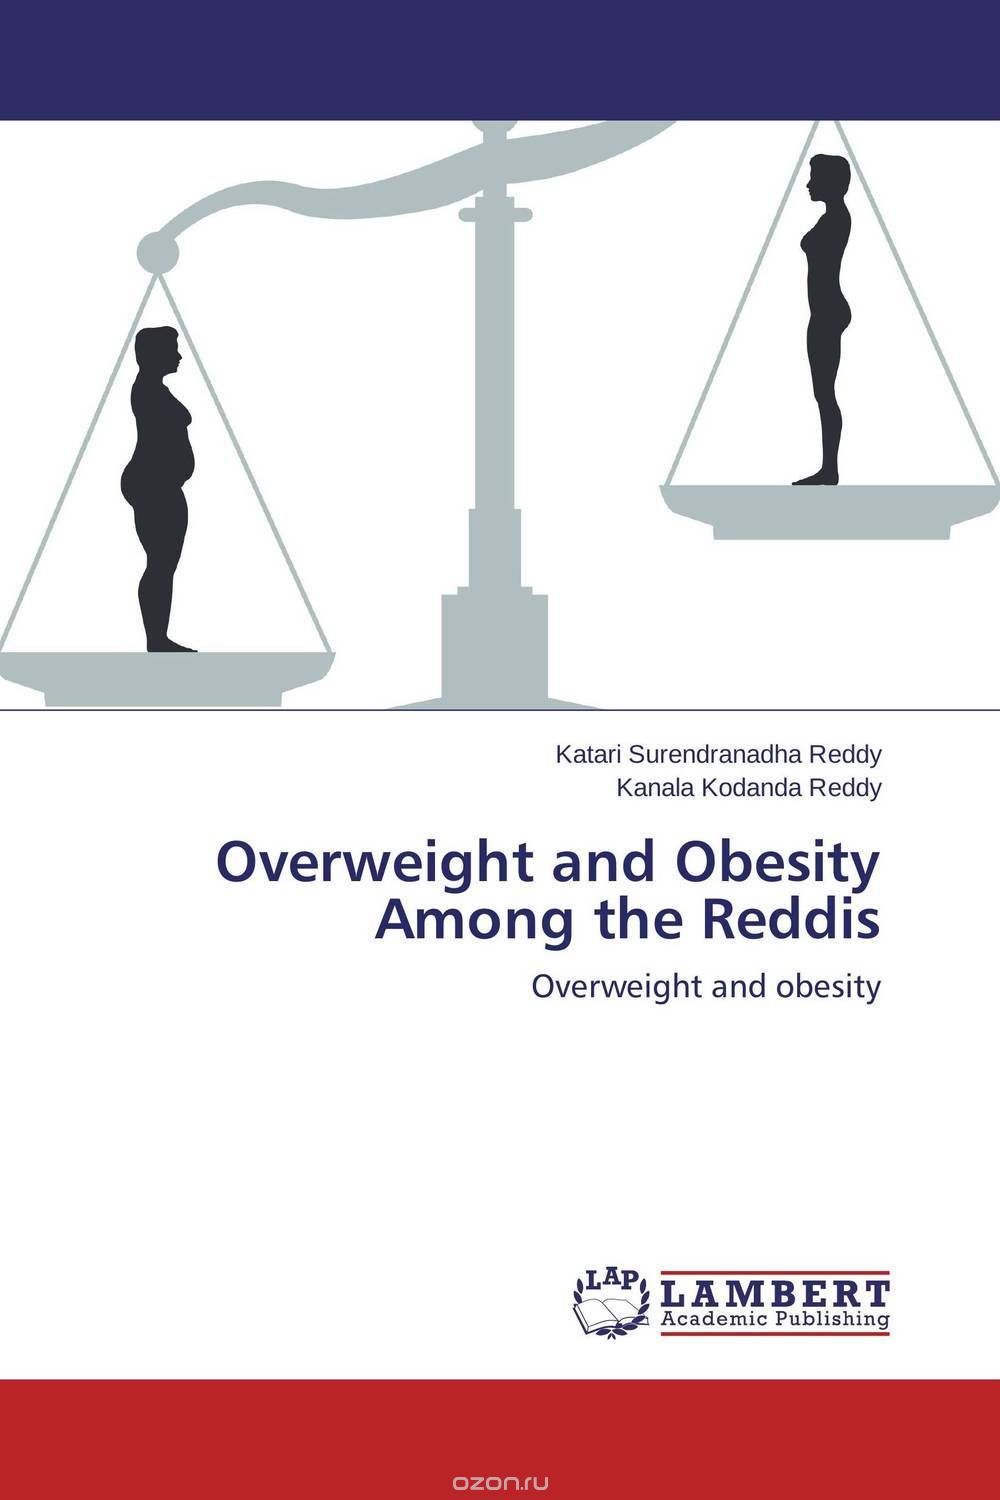 Overweight and Obesity Among the Reddis